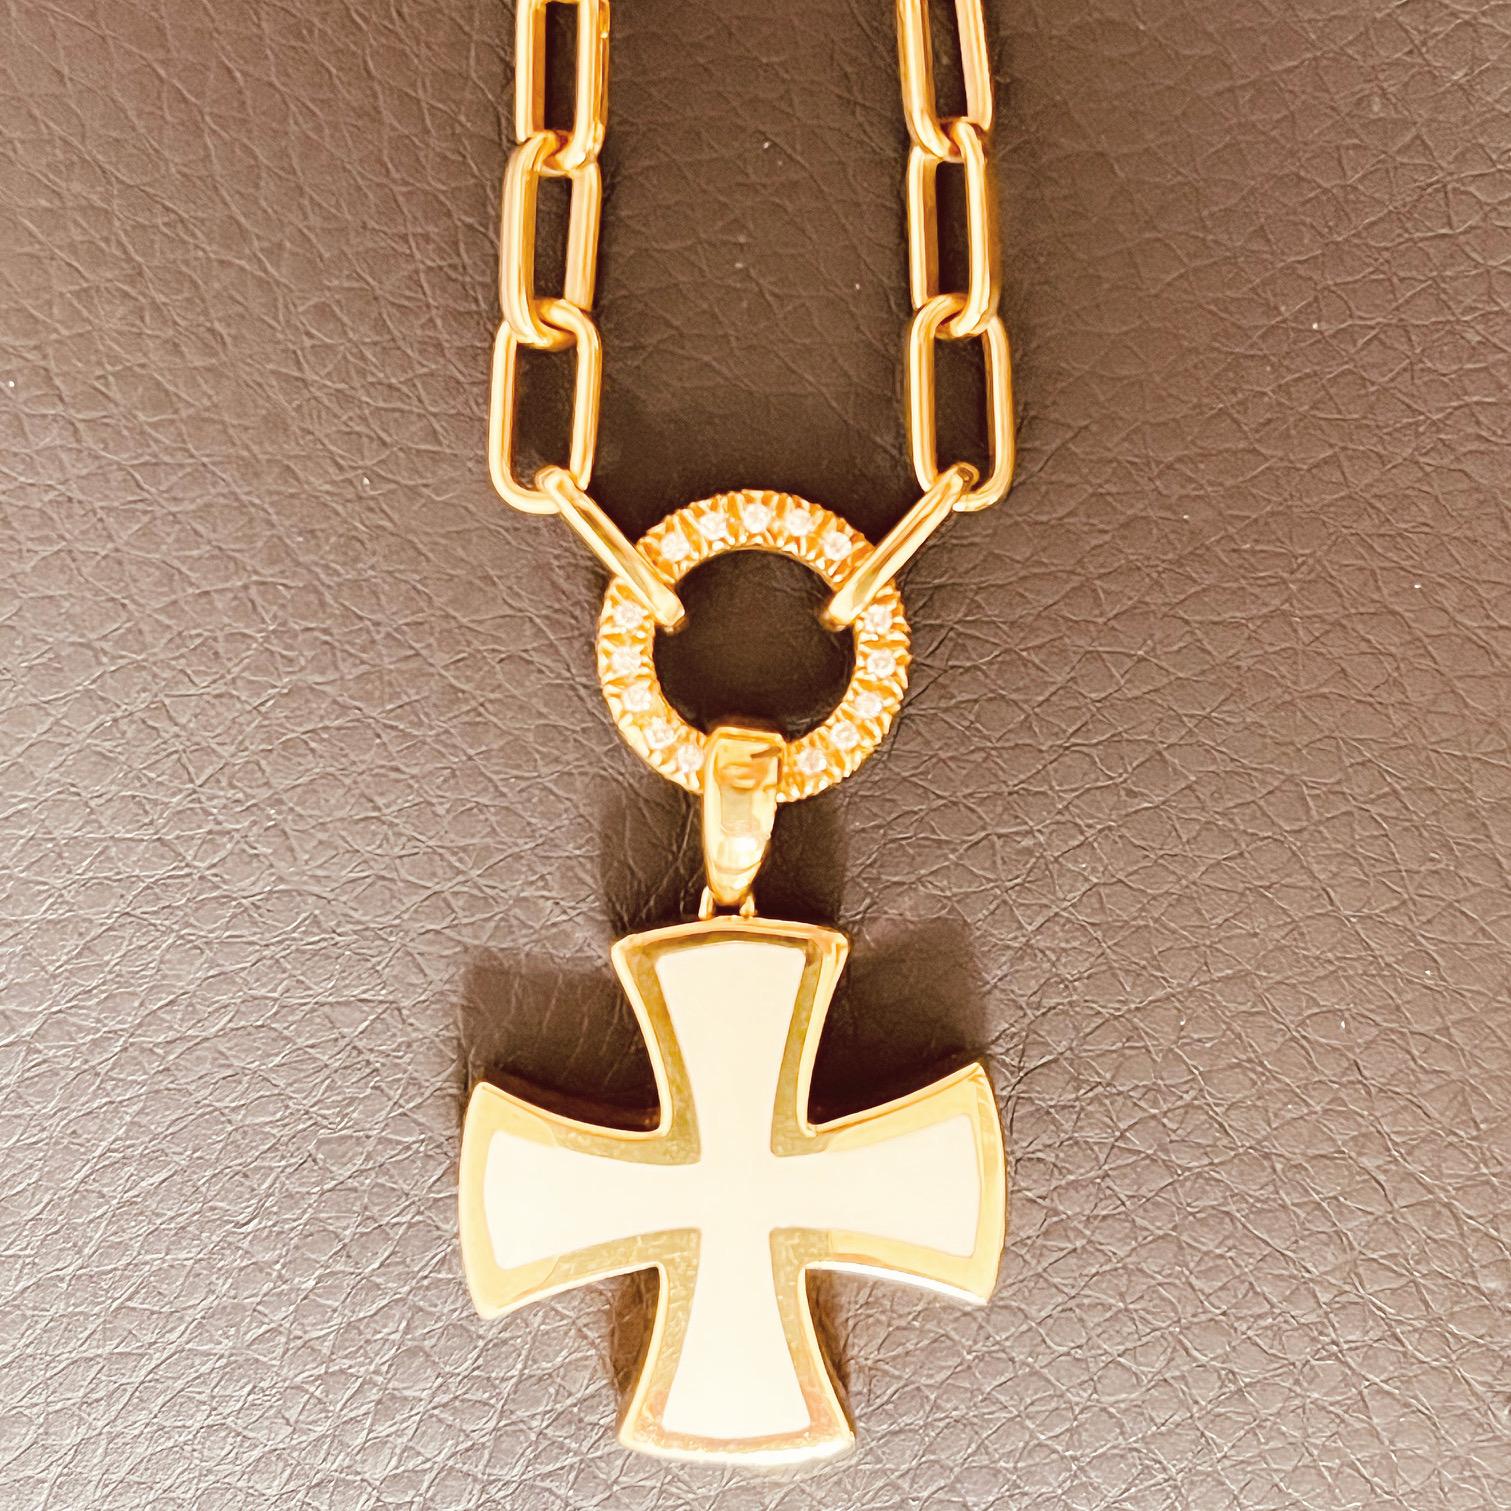 18 Carat Gold Chain Connected To A Diamond Suspended Ring & Enamel Cross Pendant For Sale 5